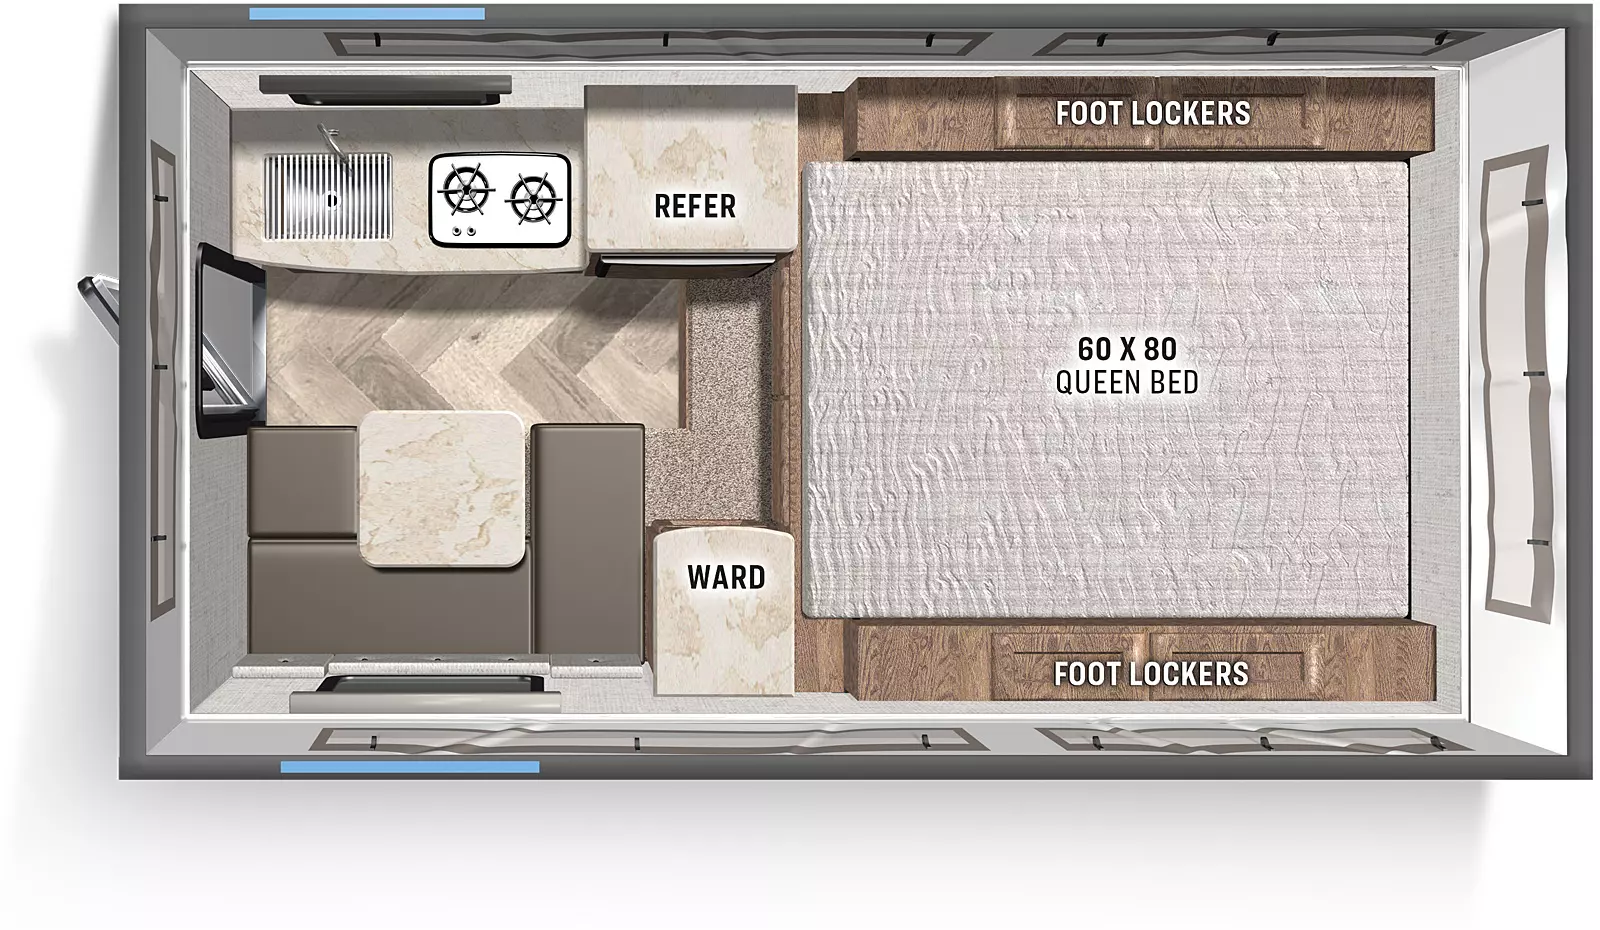 The Real Lite SS-1604 includes a rear entry door, a kitchen sink, cooktop, and over head storage, a refrigerator a step up to a 60 x 80 queen bed, bedroom storage with footlockers on both sides, wardrobe below TV top; and dinette seating with table. 